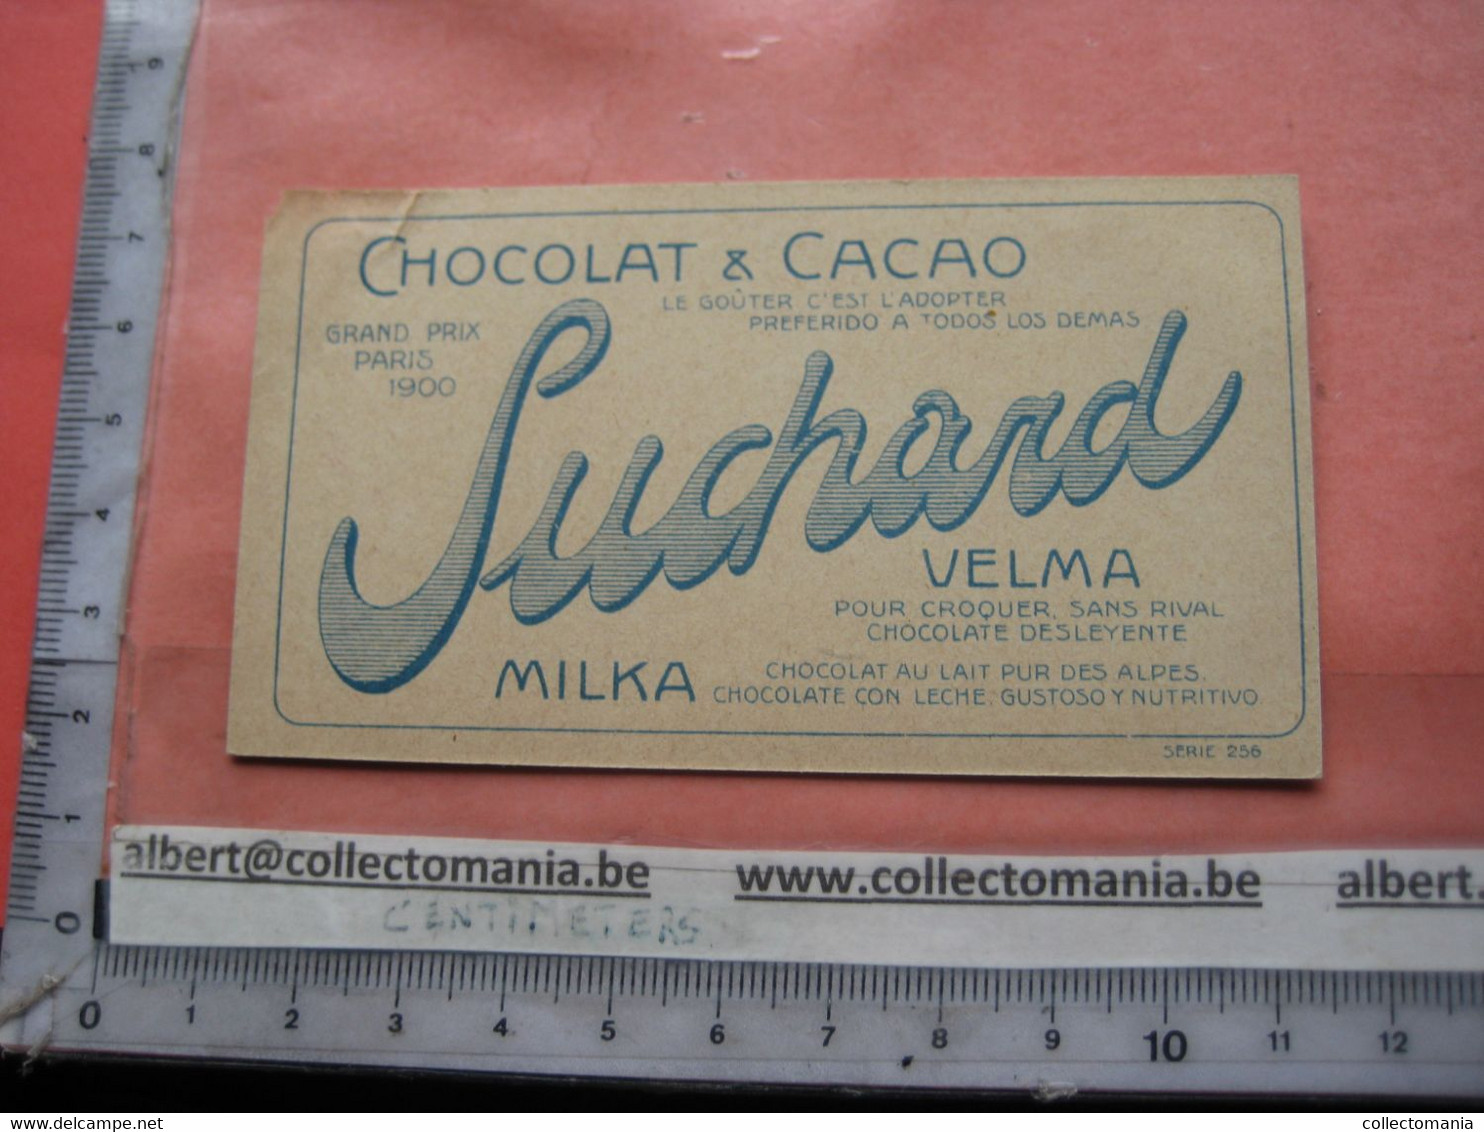 11 Card Chocolade Cacao Suchard nr 256 Flowers - FRONT = VERY GOOD - backside, center glue stain, bad ungluing